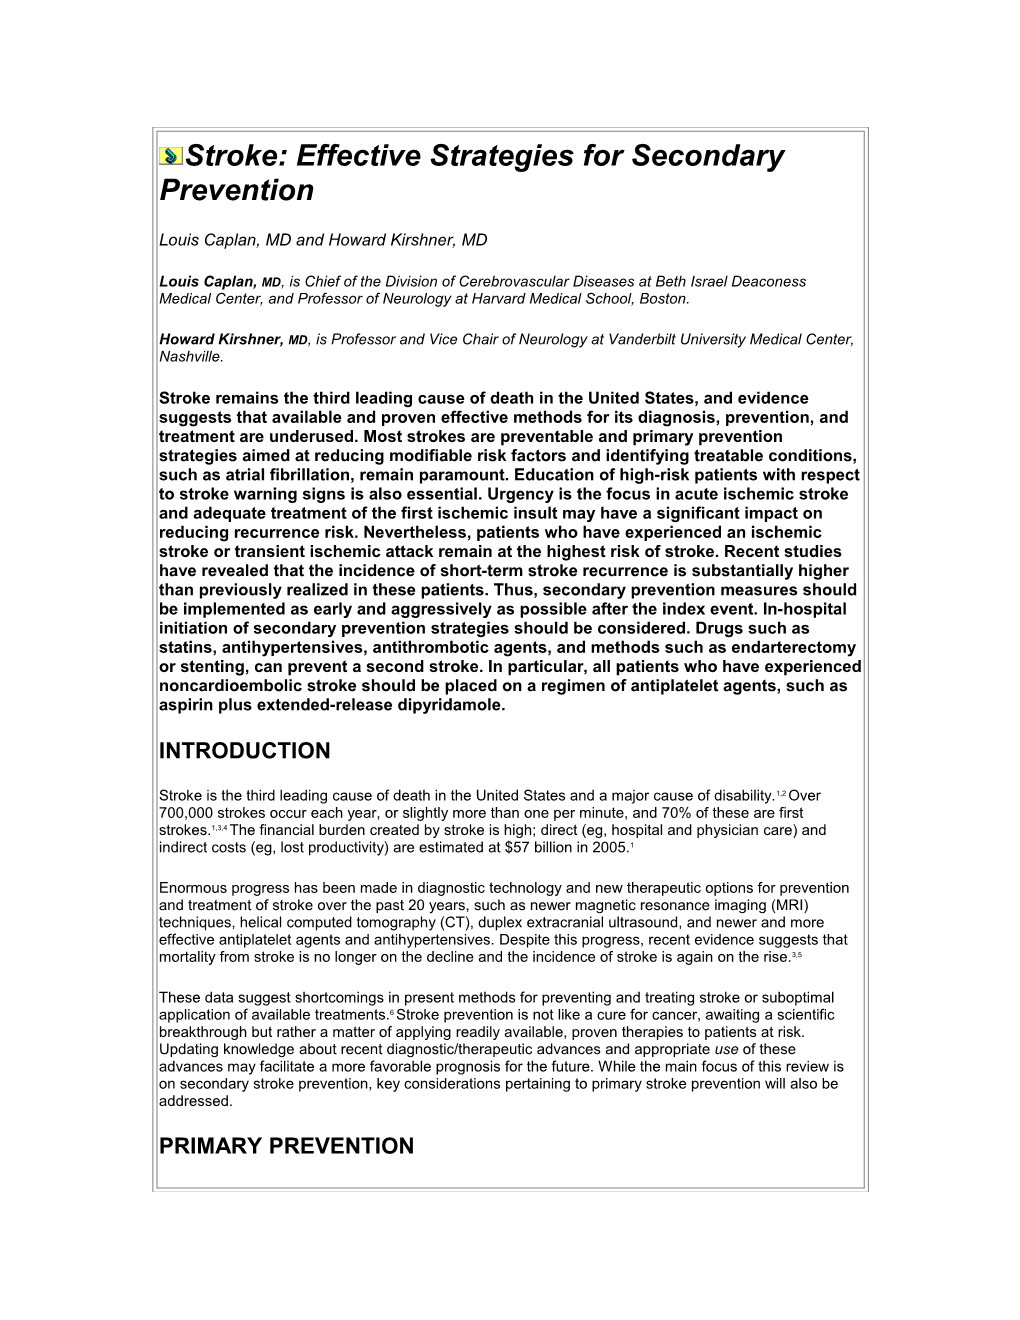 Stroke: Effective Strategies for Secondary Prevention